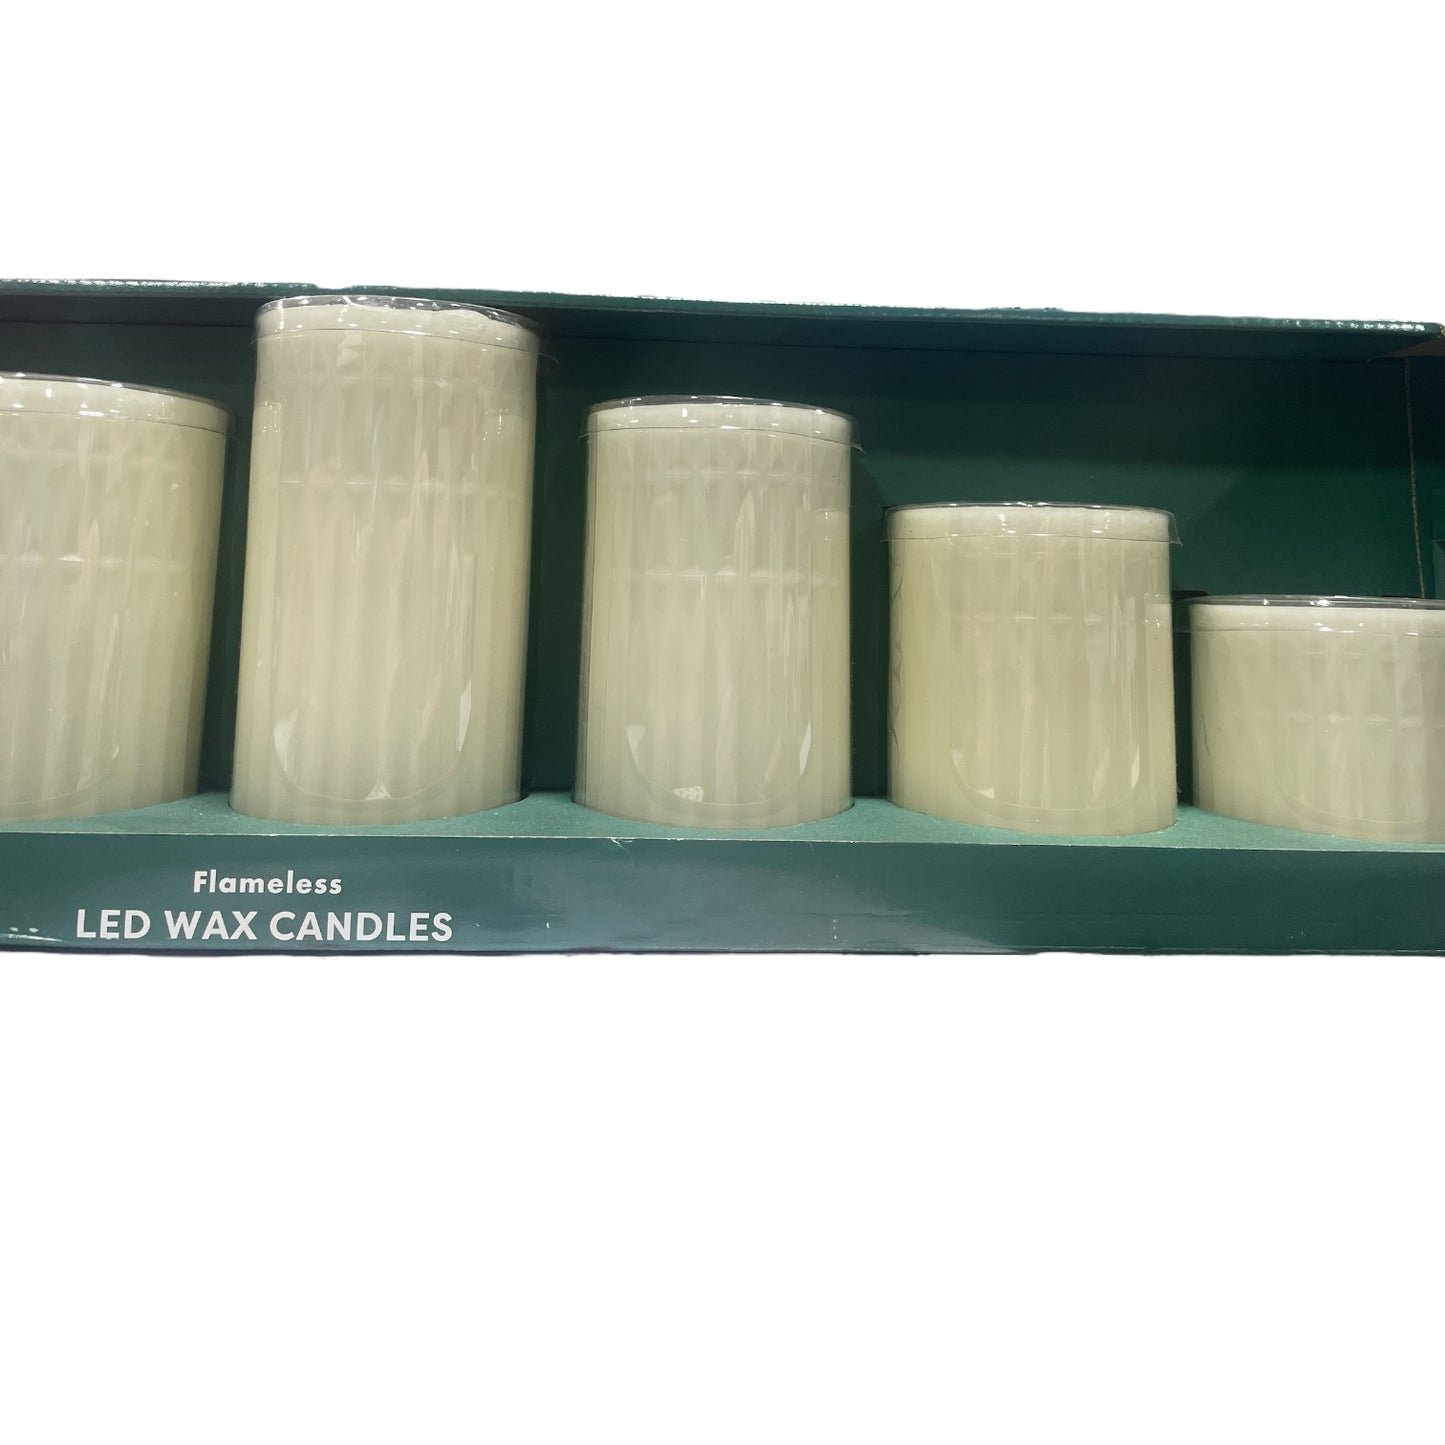 Member's Mark Flameless LED Wax Textured Candles w/ Remote, 7 Piece